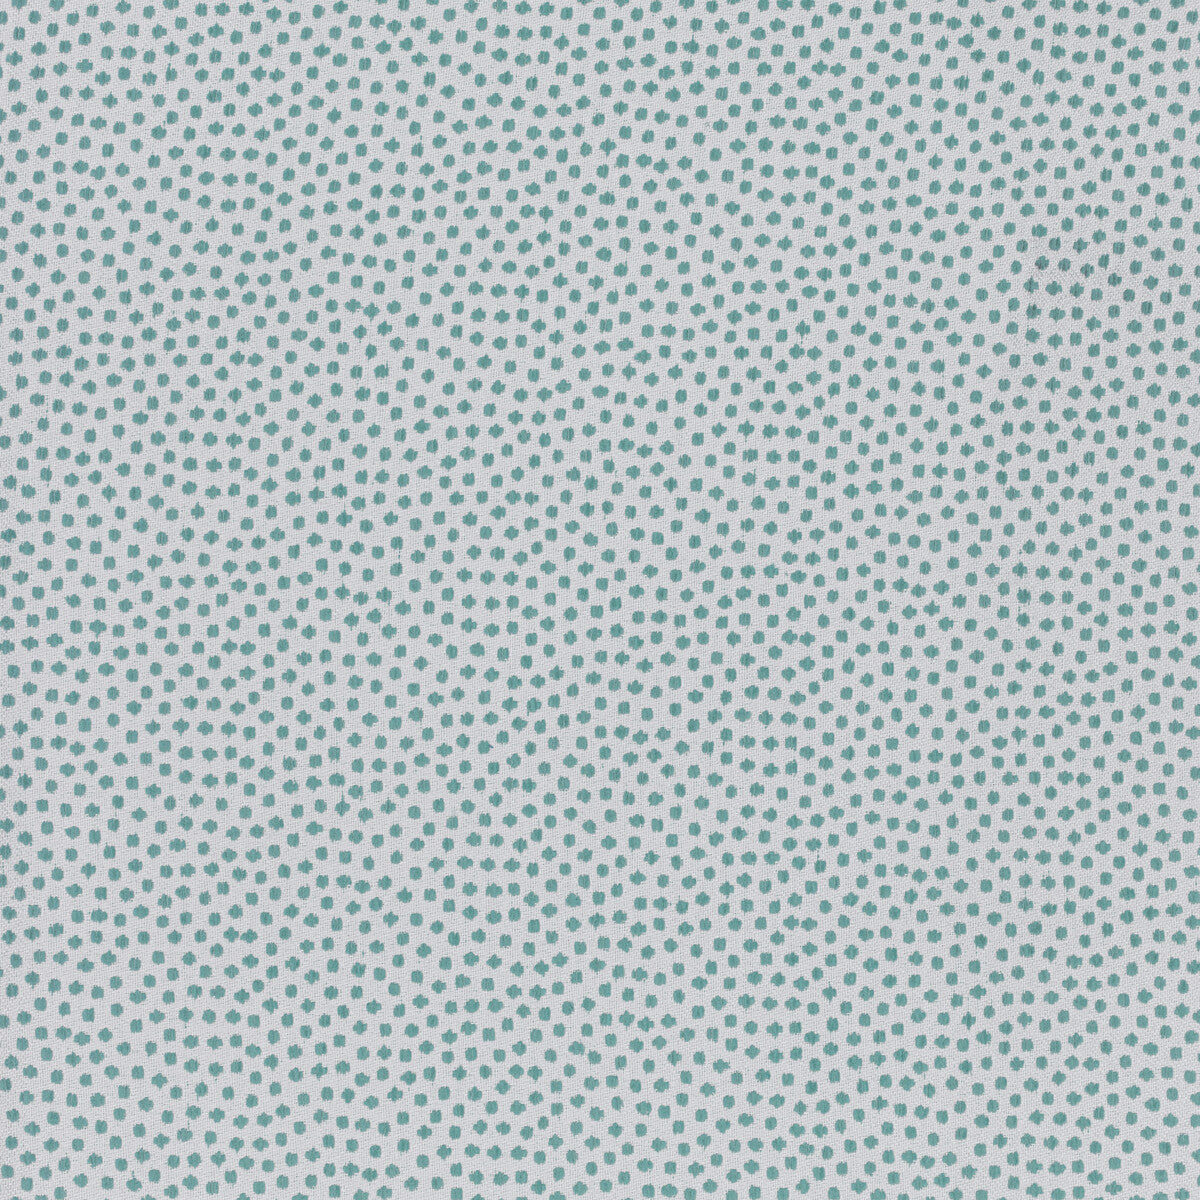 Kravet Design fabric in 36085-13 color - pattern 36085.13.0 - by Kravet Design in the Inside Out Performance Fabrics collection